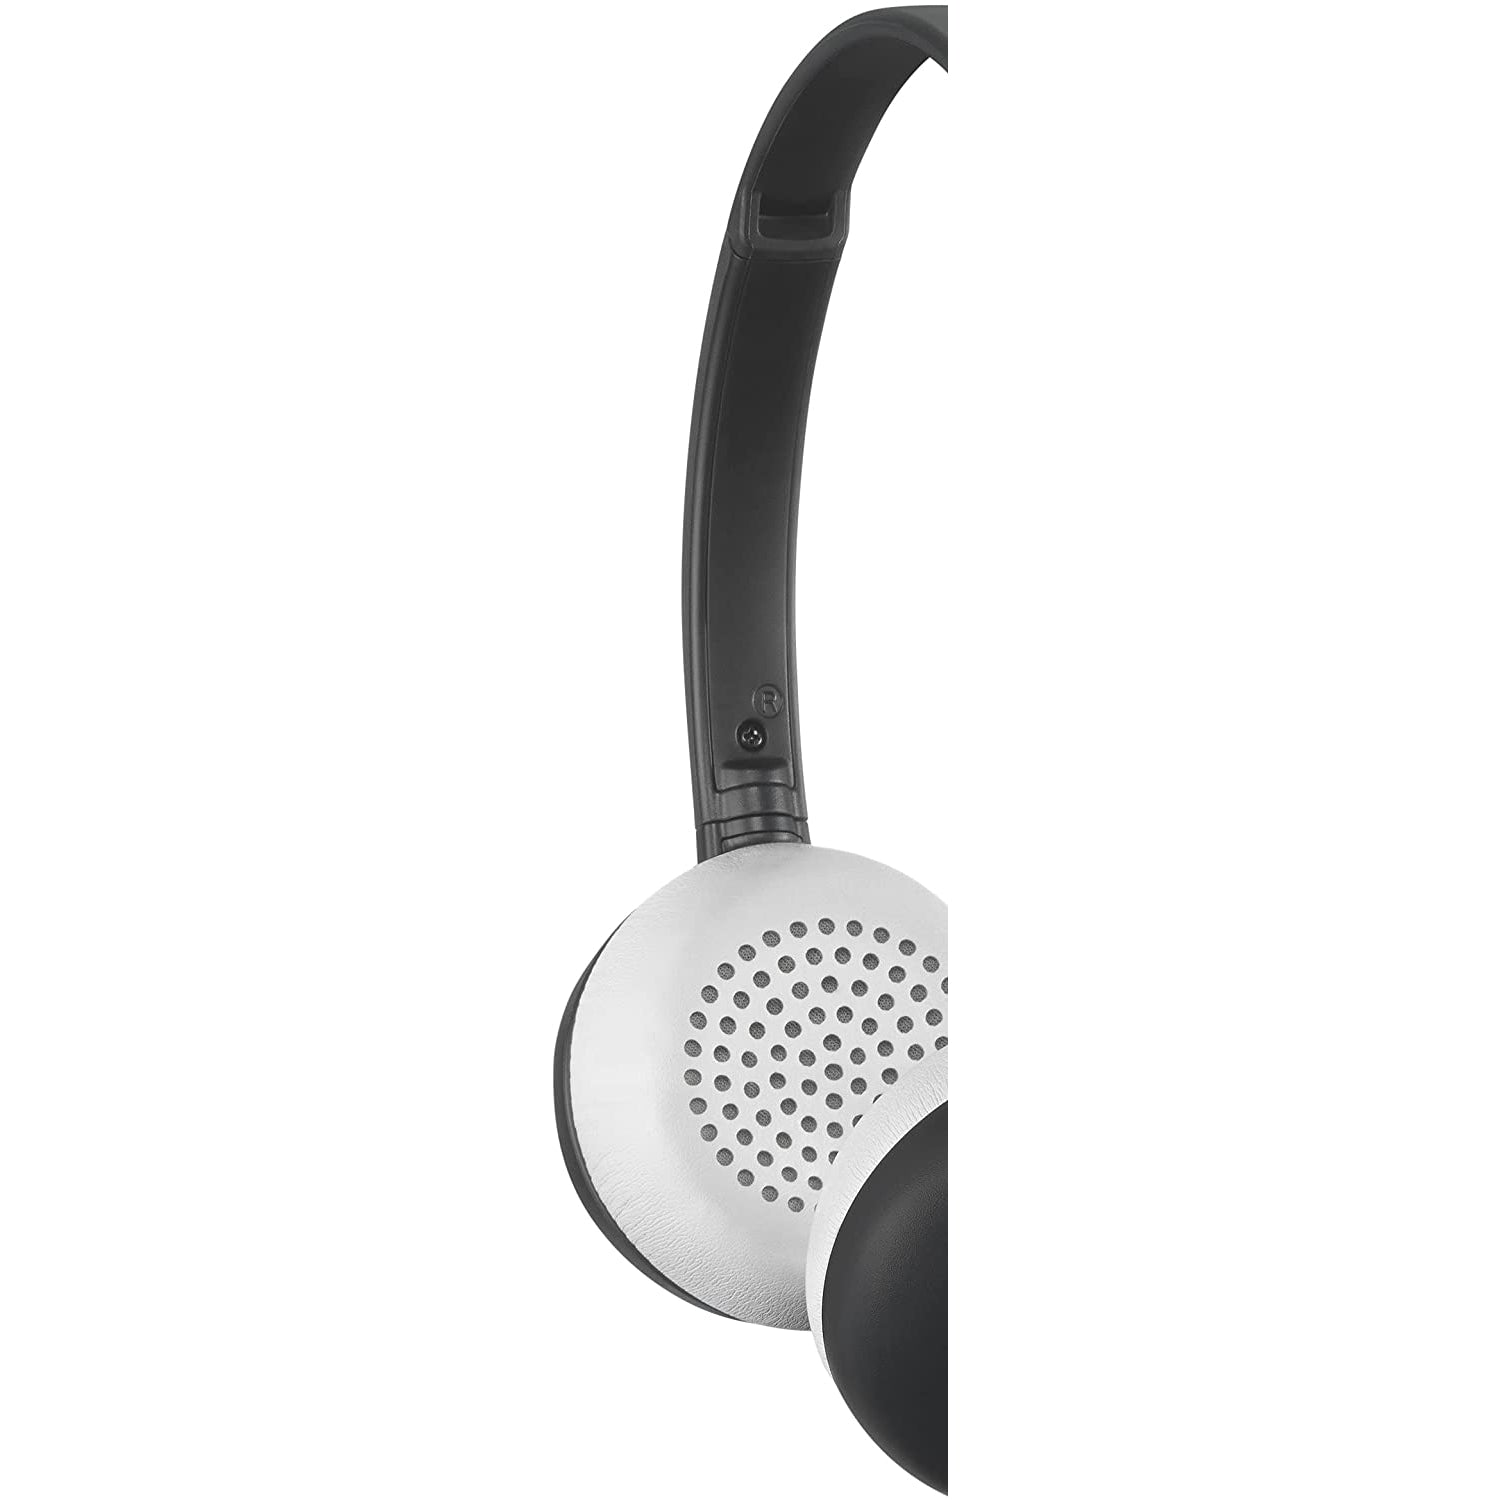 JVC S20BT Wireless Bluetooth On Ear Headphones Foldable with Built-In Remote and Mic for Hands Call Handling, Black